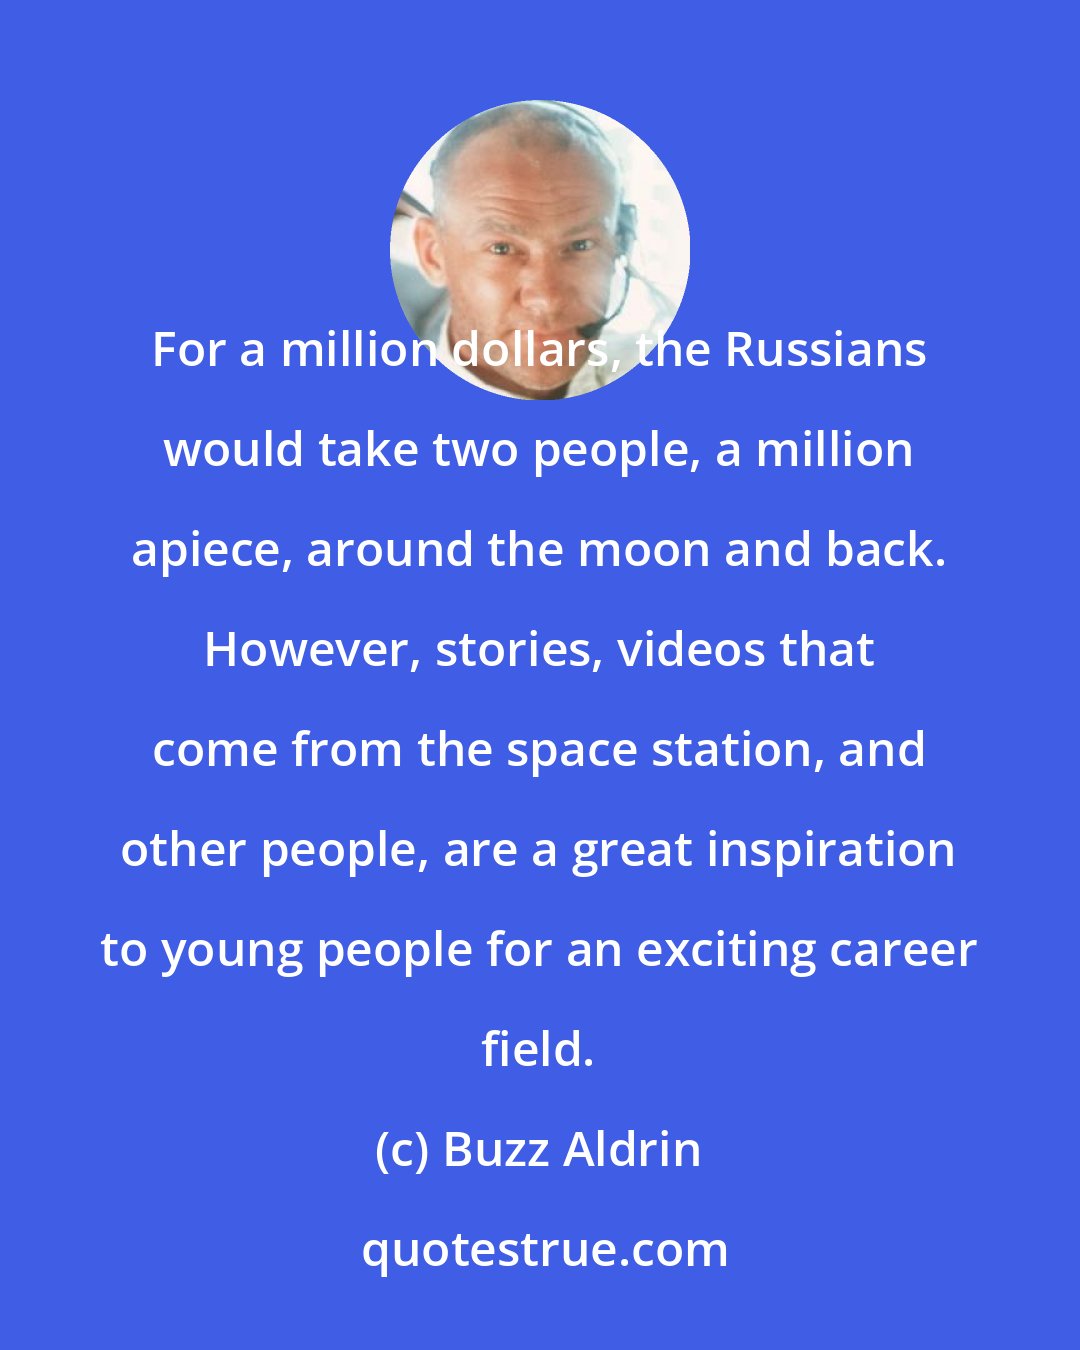 Buzz Aldrin: For a million dollars, the Russians would take two people, a million apiece, around the moon and back. However, stories, videos that come from the space station, and other people, are a great inspiration to young people for an exciting career field.